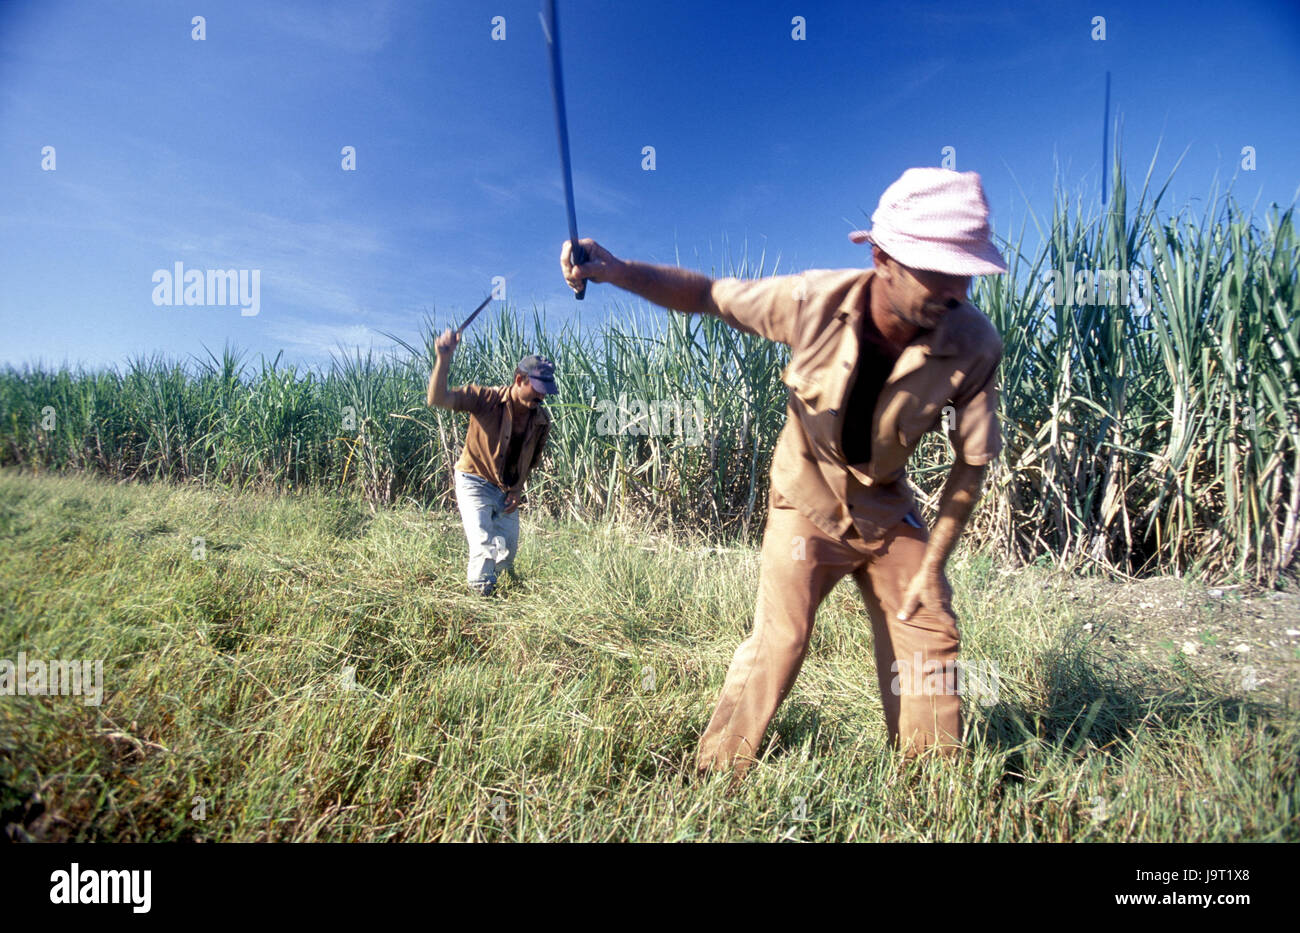 Cuba,Cueto,sugarcane plantation,men,work,no model release,Central America,plantation,annex,sugarcane,Cuban,locals,farmers,work,work in the fields,agriculture,outside, Stock Photo